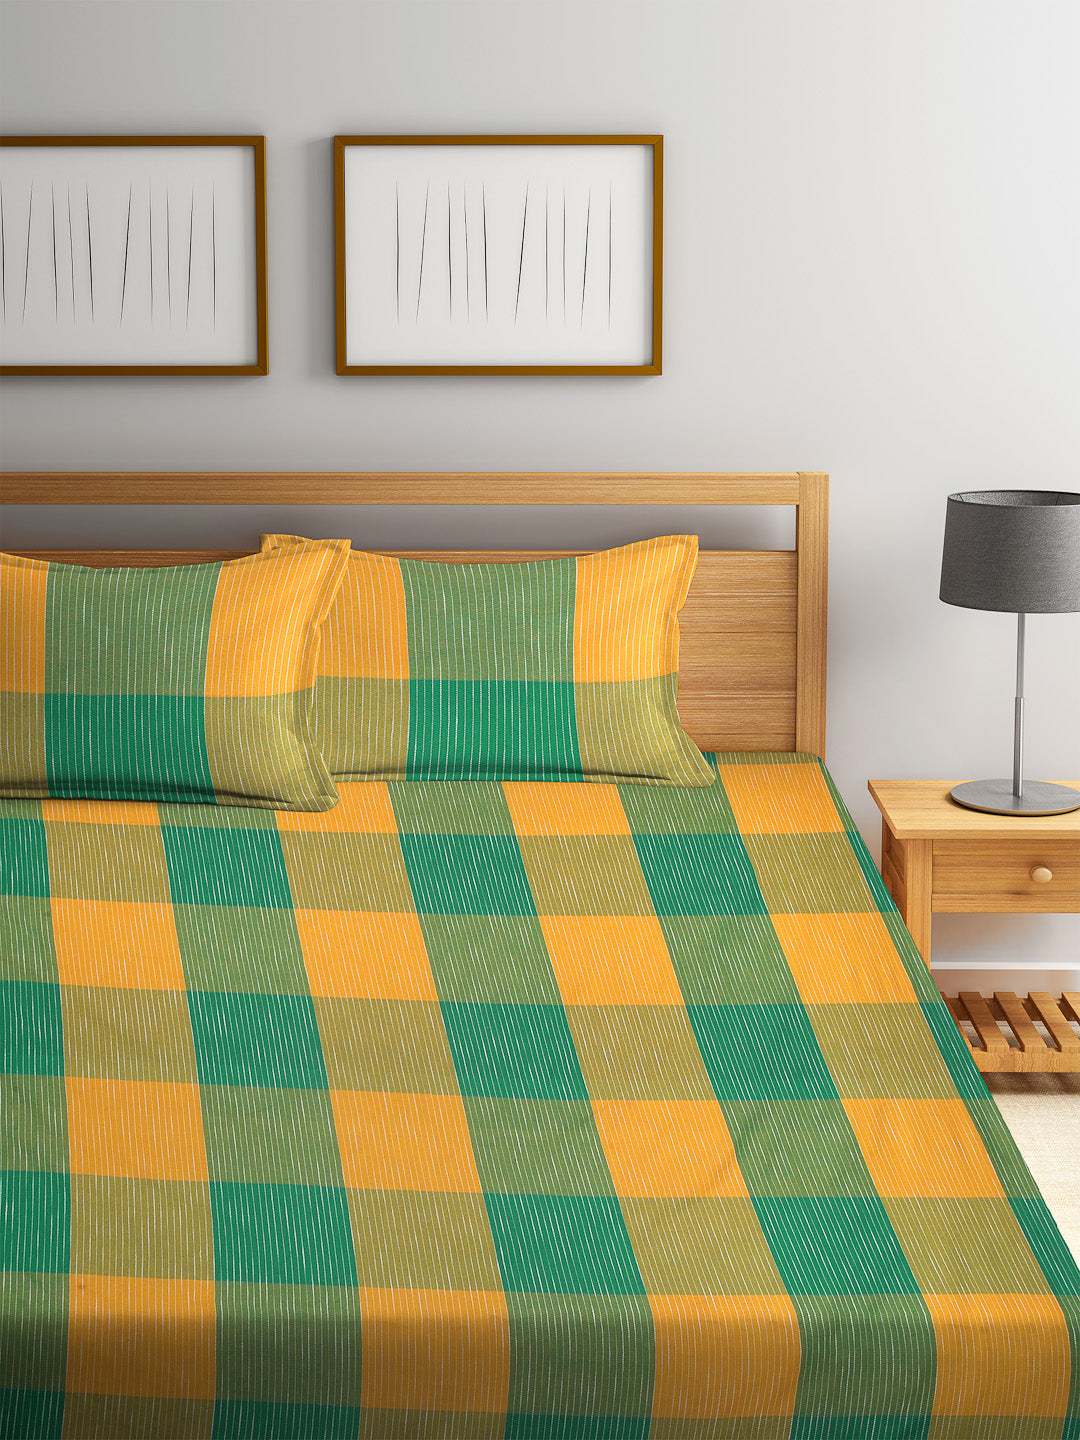 Arrabi Green & Yellow Check Handwoven Cotton Double King Size Bedsheet with 2 Pillow Covers (260 x 255 cm)